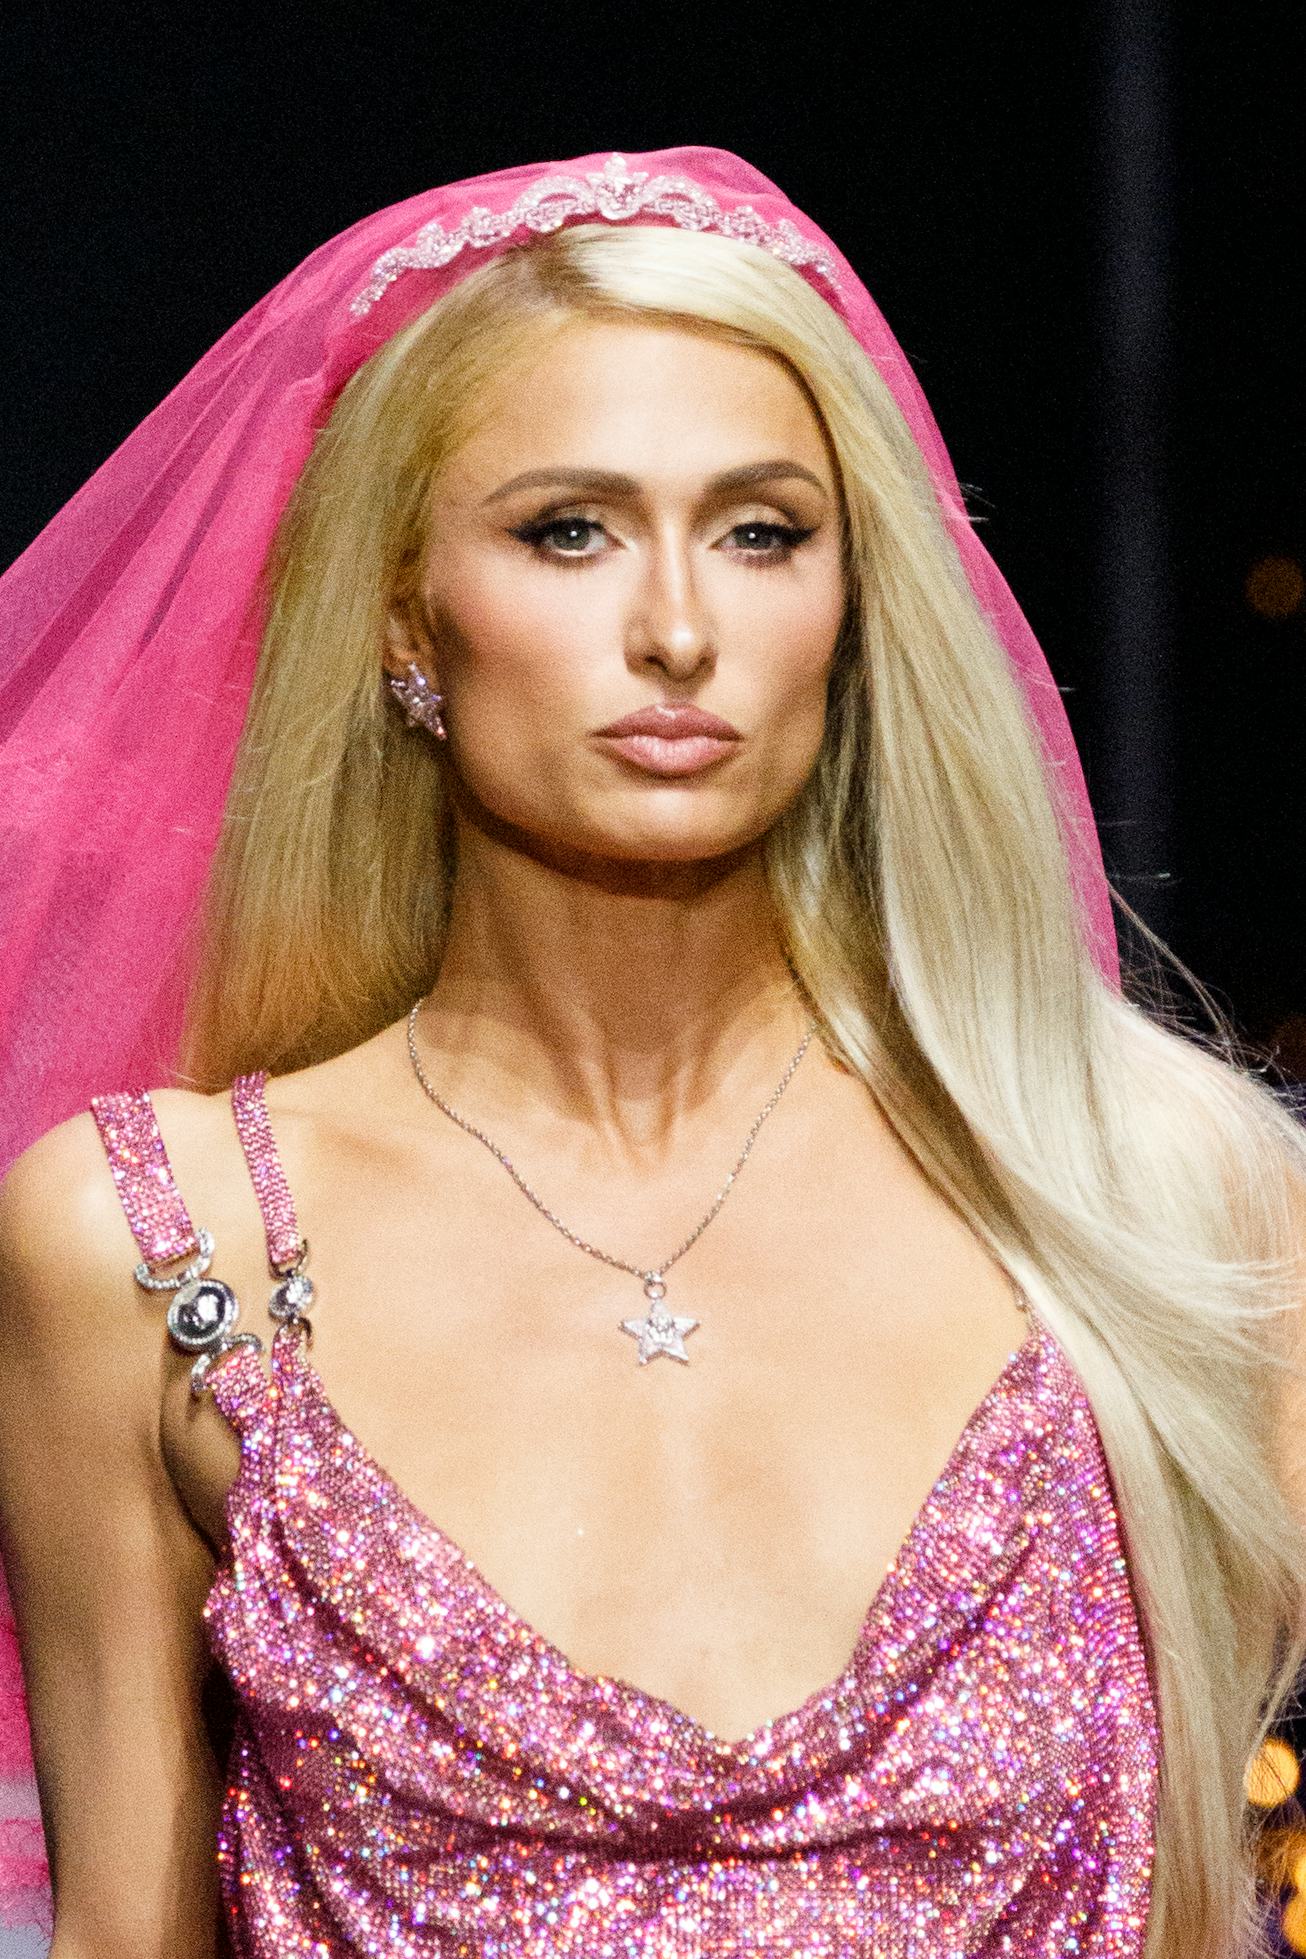 MILAN, ITALY - SEPTEMBER 23: Paris Hilton walks the runway of the Versace Fashion Show during the Mi...